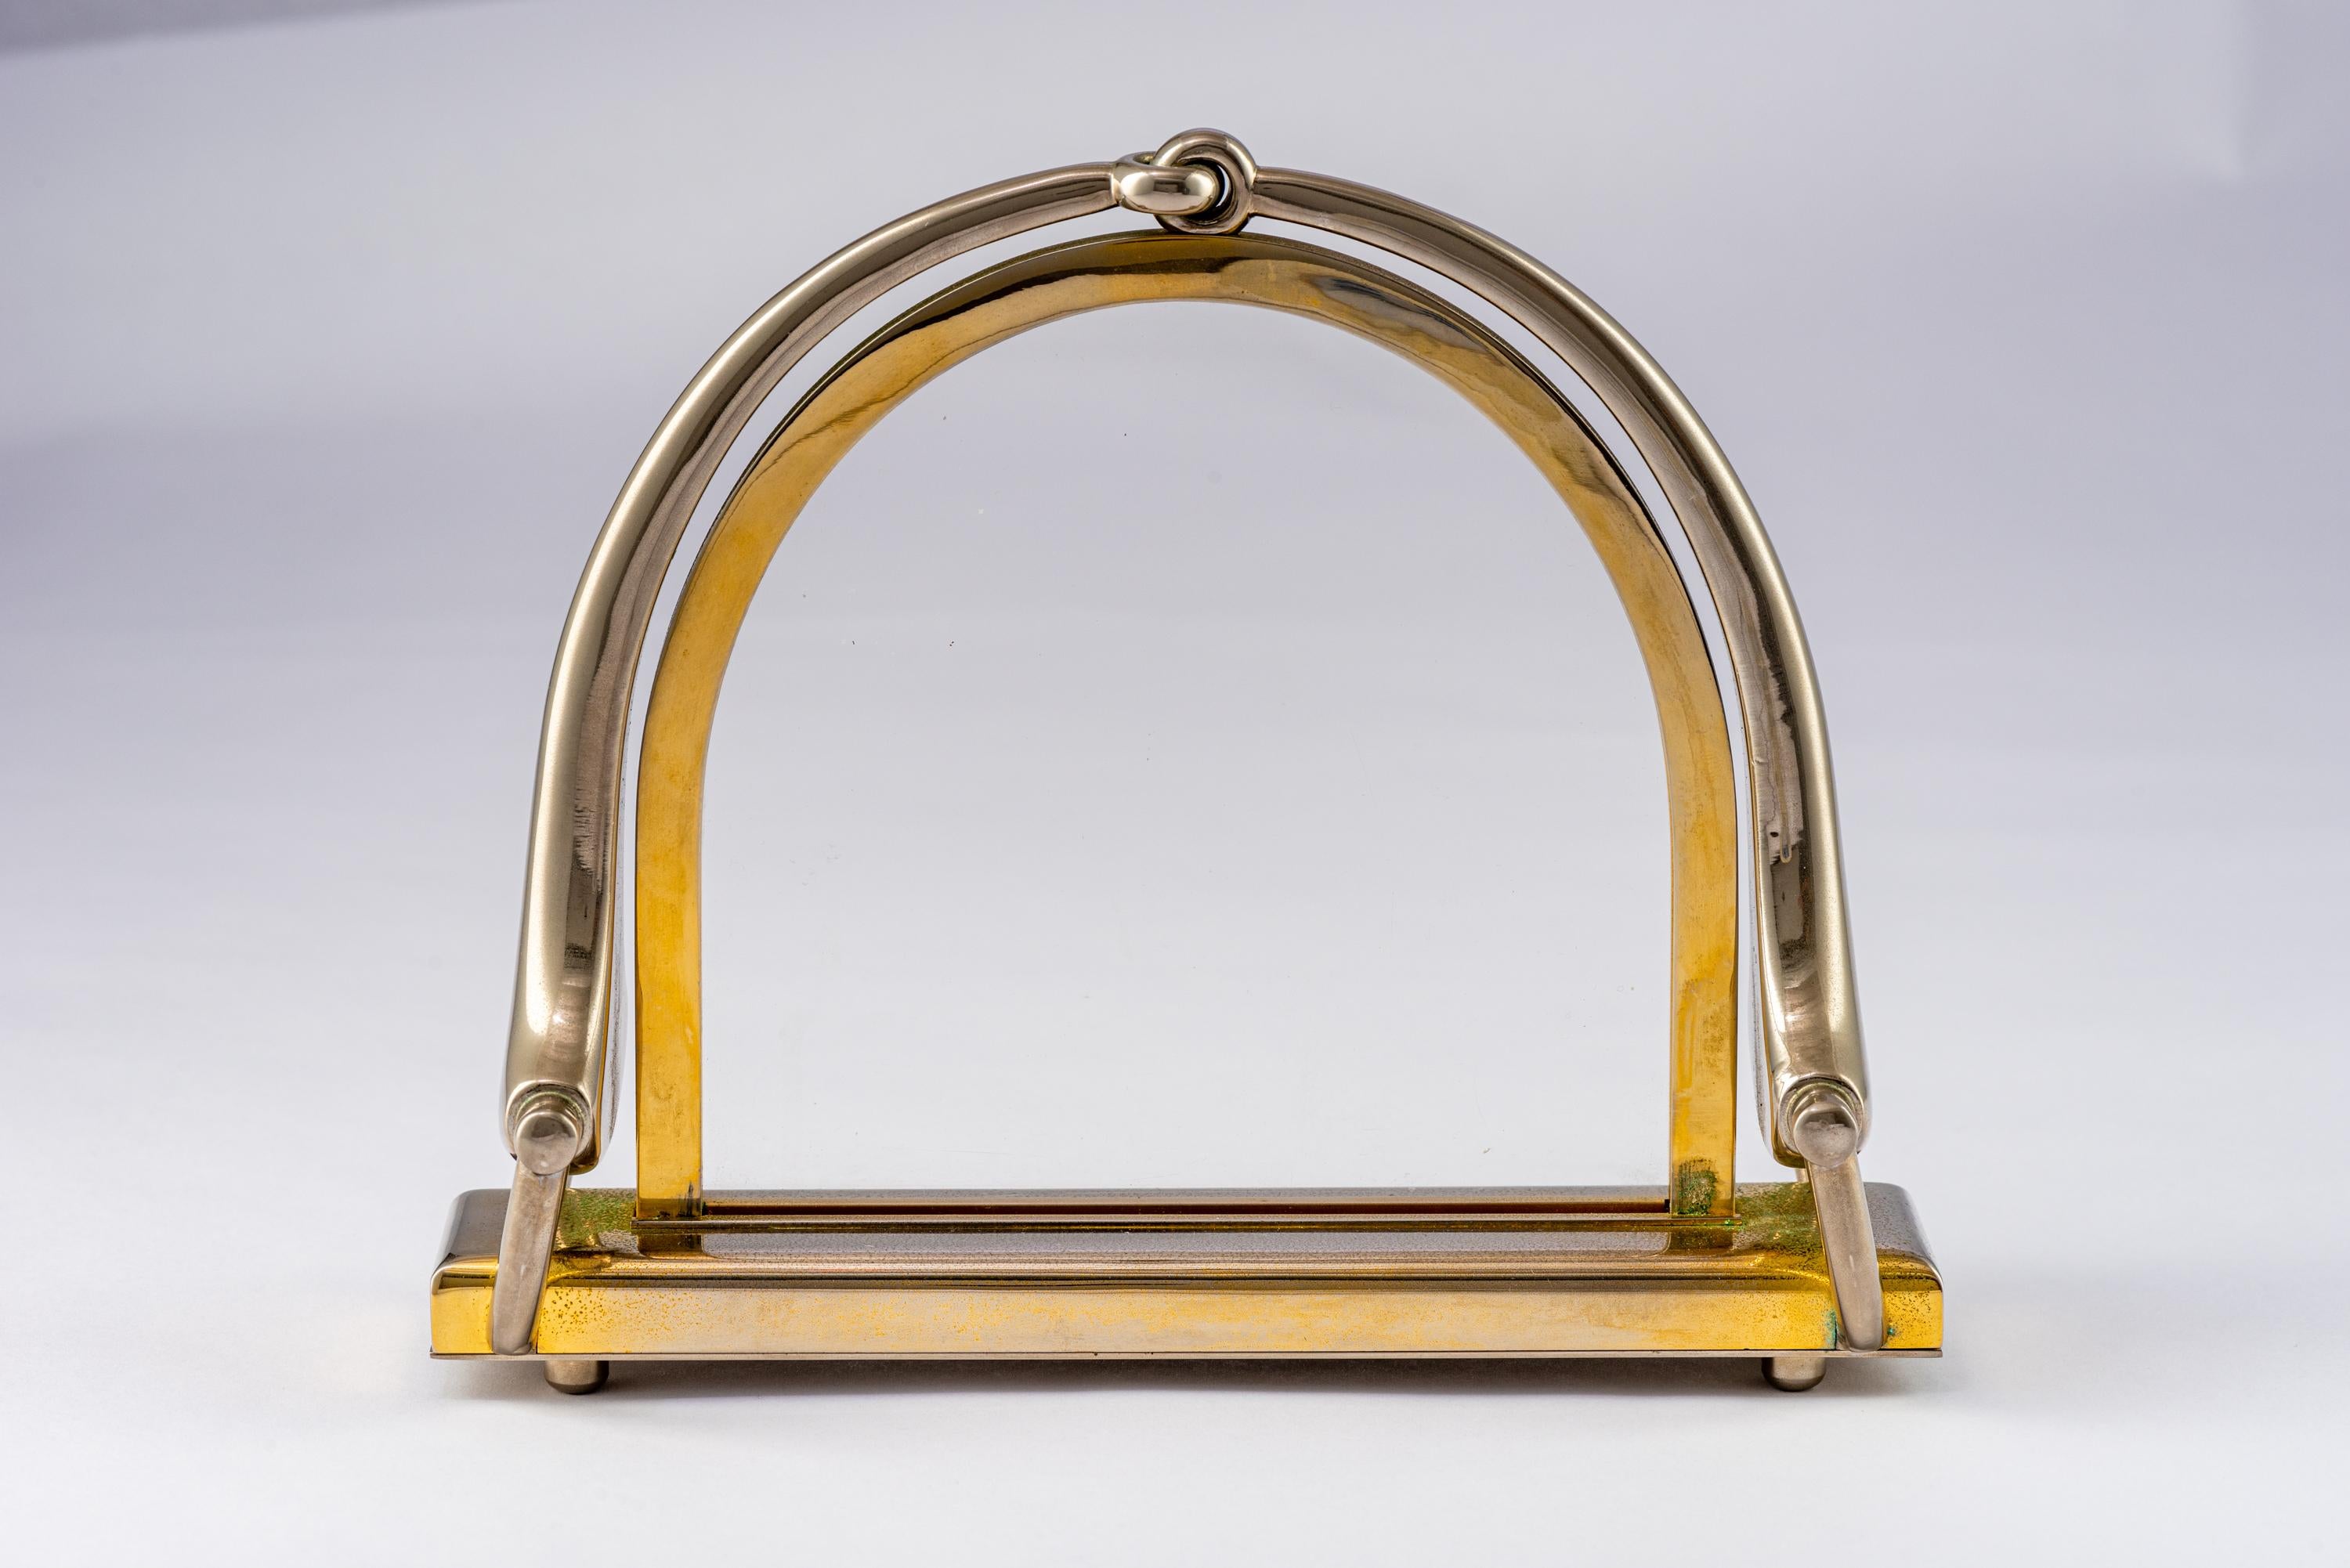 Gucci Horsebit picture frame, brass, nickel, signed. Stirrup form photo frame finished in brass and nickel. The display opening is 5.63 inches in height by 5.75 inches wide. The four circular feet on the underside of the base unscrew, releasing the